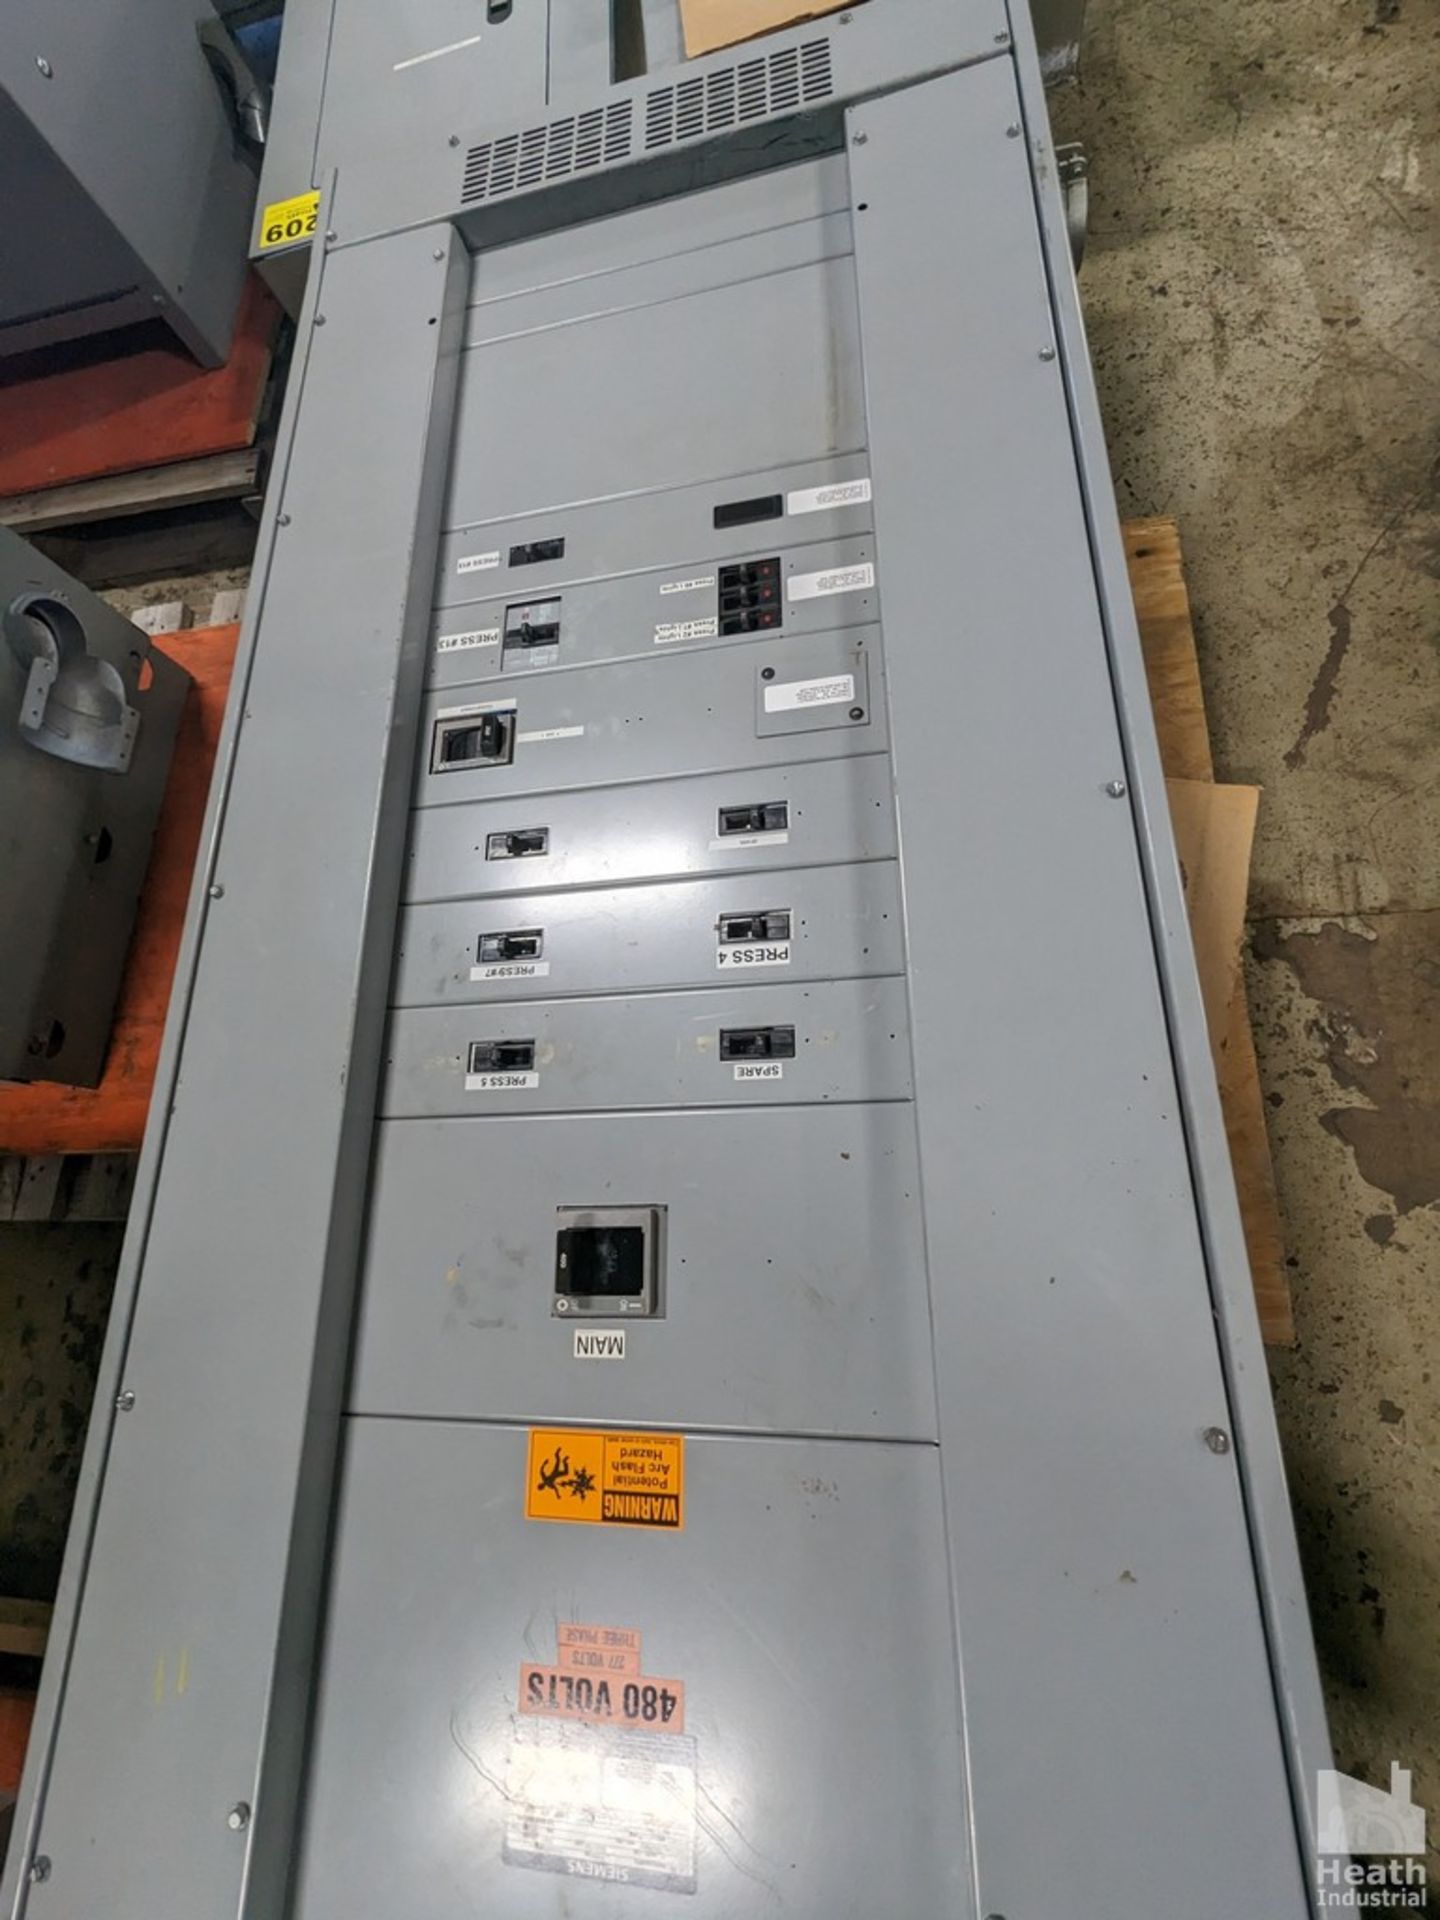 SIEMENS P4E75JX400FTS 480Y/277 3 PHASE 4W ELECTRIC PANEL - Image 3 of 3